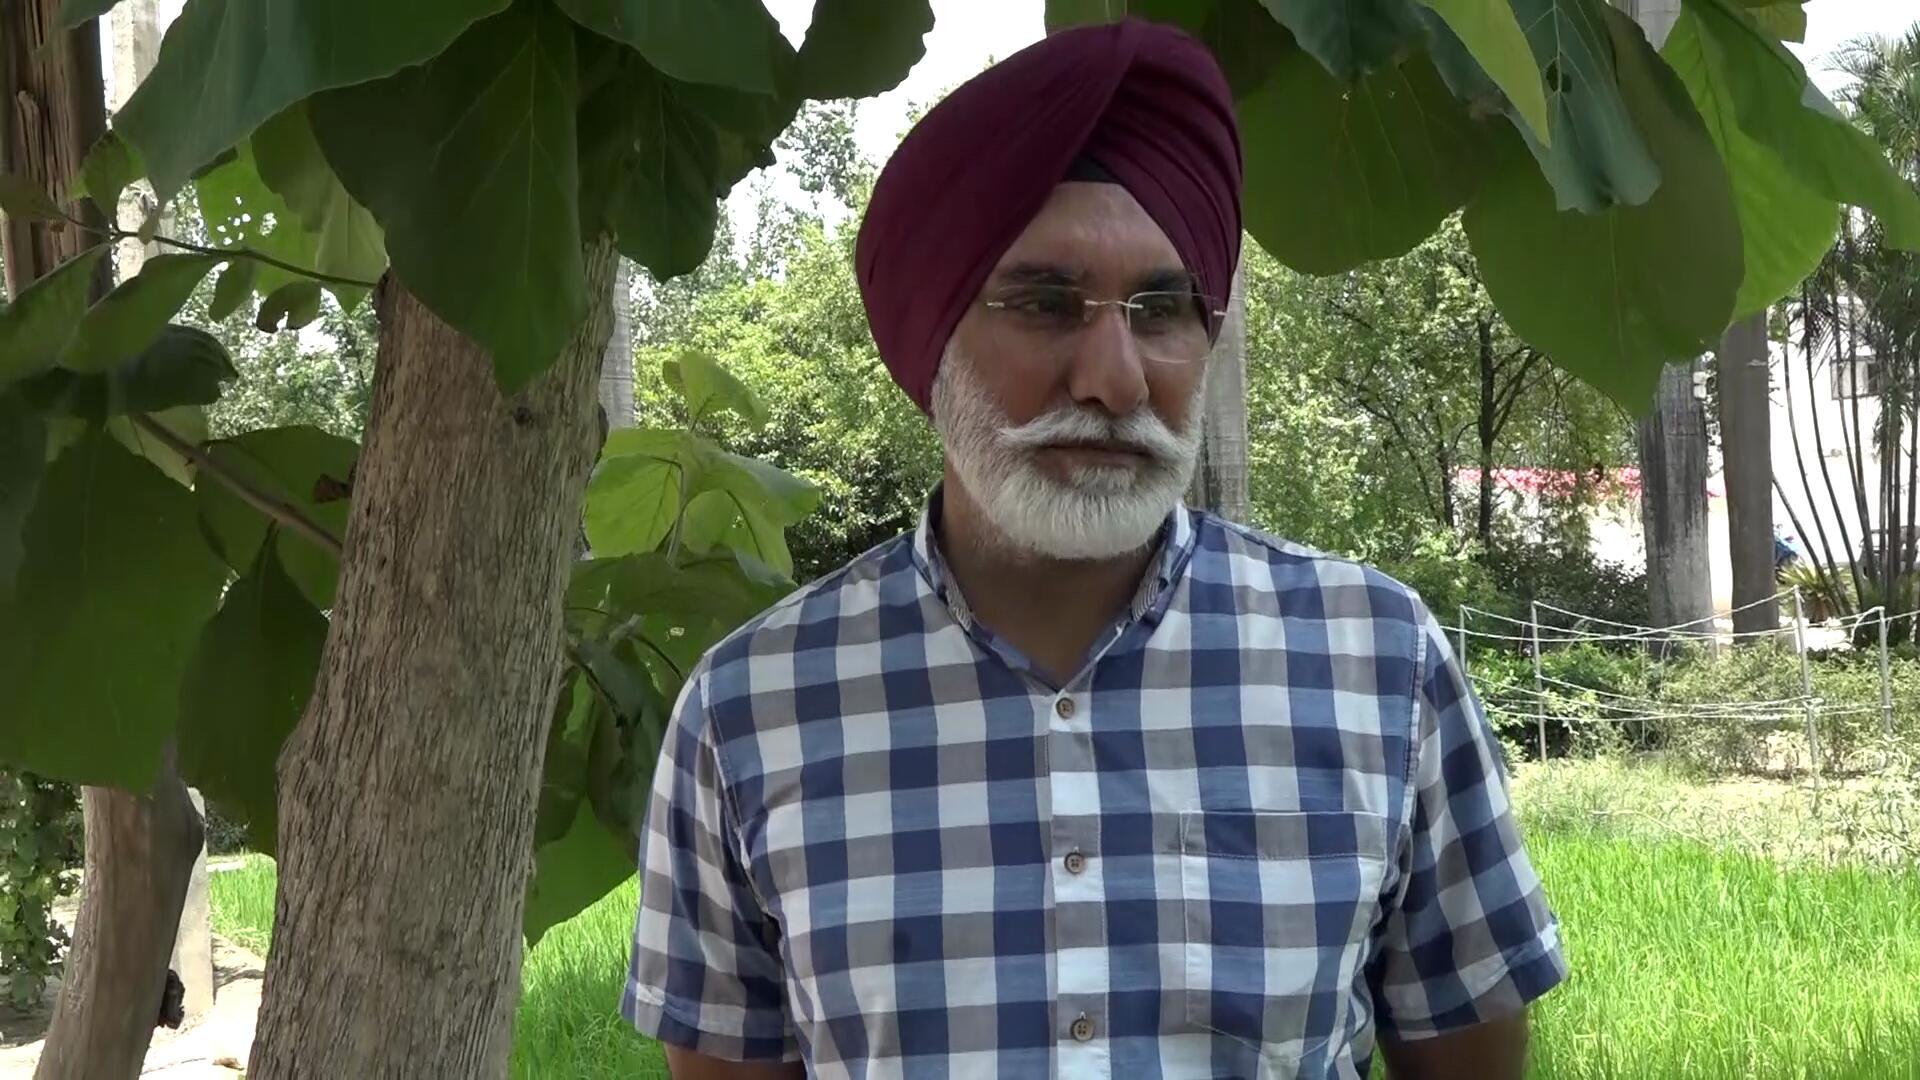 a picture of an indian man wearing a blue check shirt and a red turban